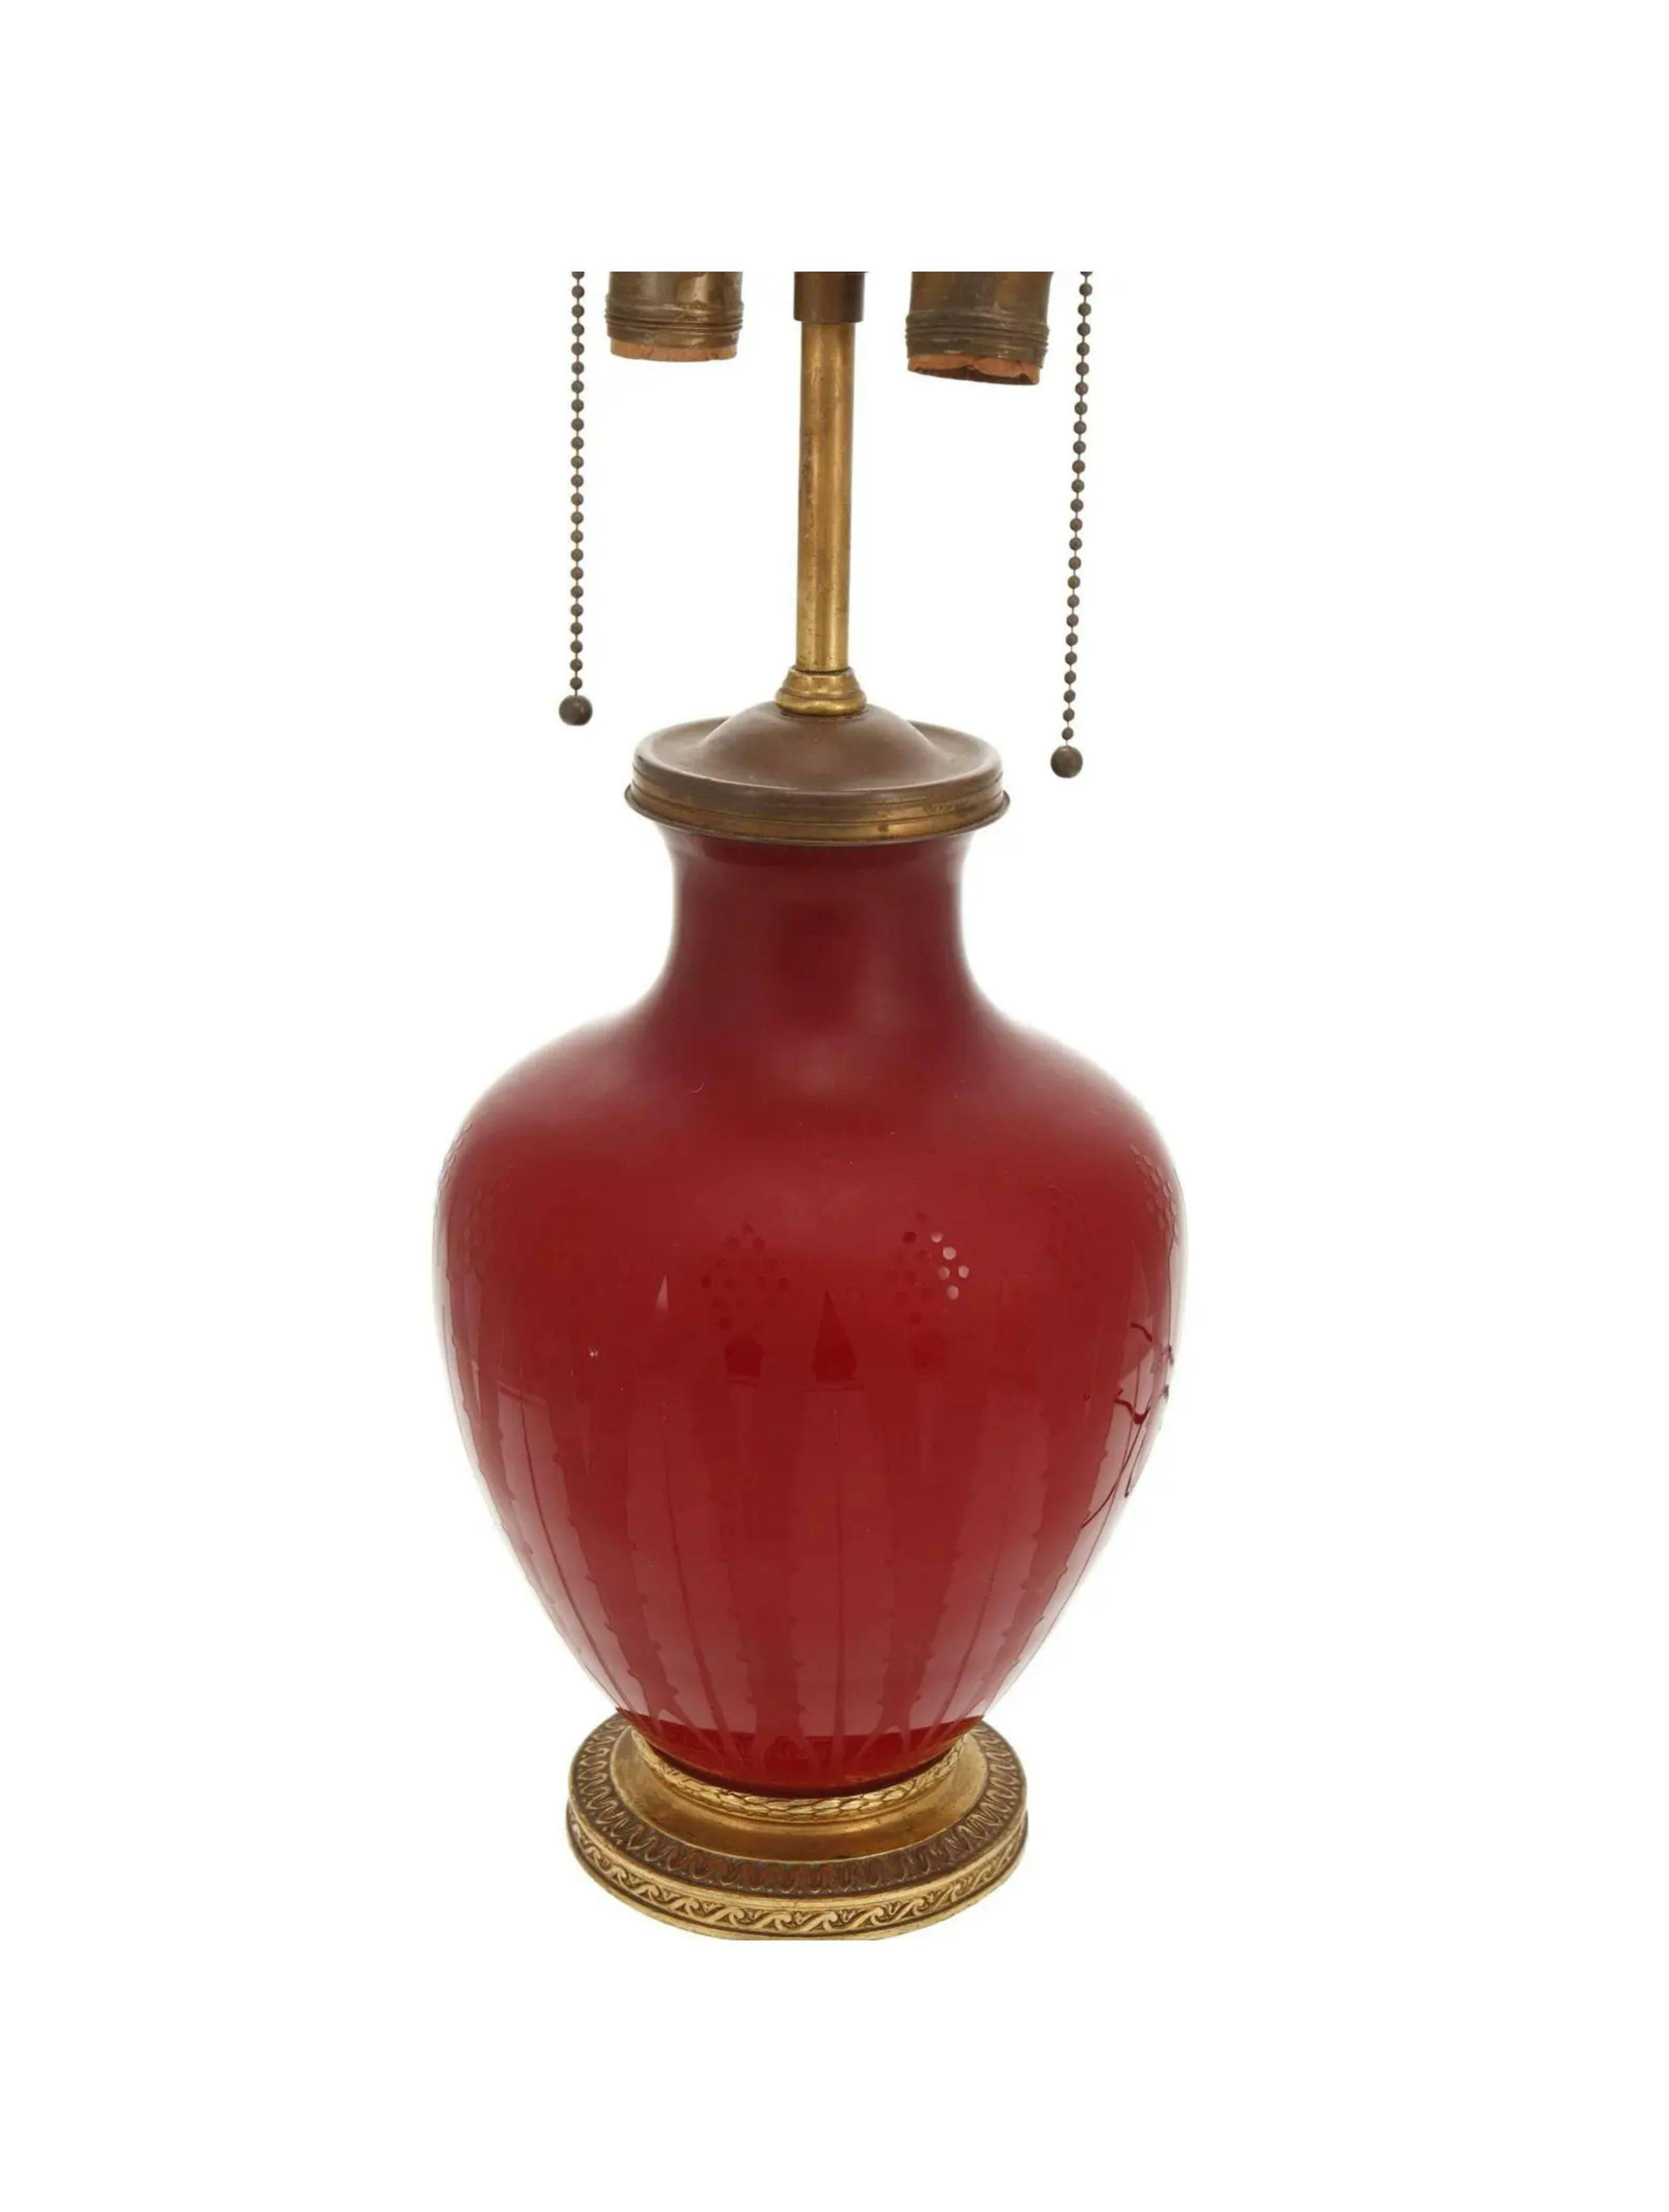 Antique Art Deco steuben red acid etched glass lamp.

Additional information: 
Materials: Etching, Glass
Color: Red
Brand: Steuben
Designer: Steuben.
Period: 1920s.
Styles: Art Deco.
Lamp Shade: Not Included.
Power Sources: Up to 120V (US